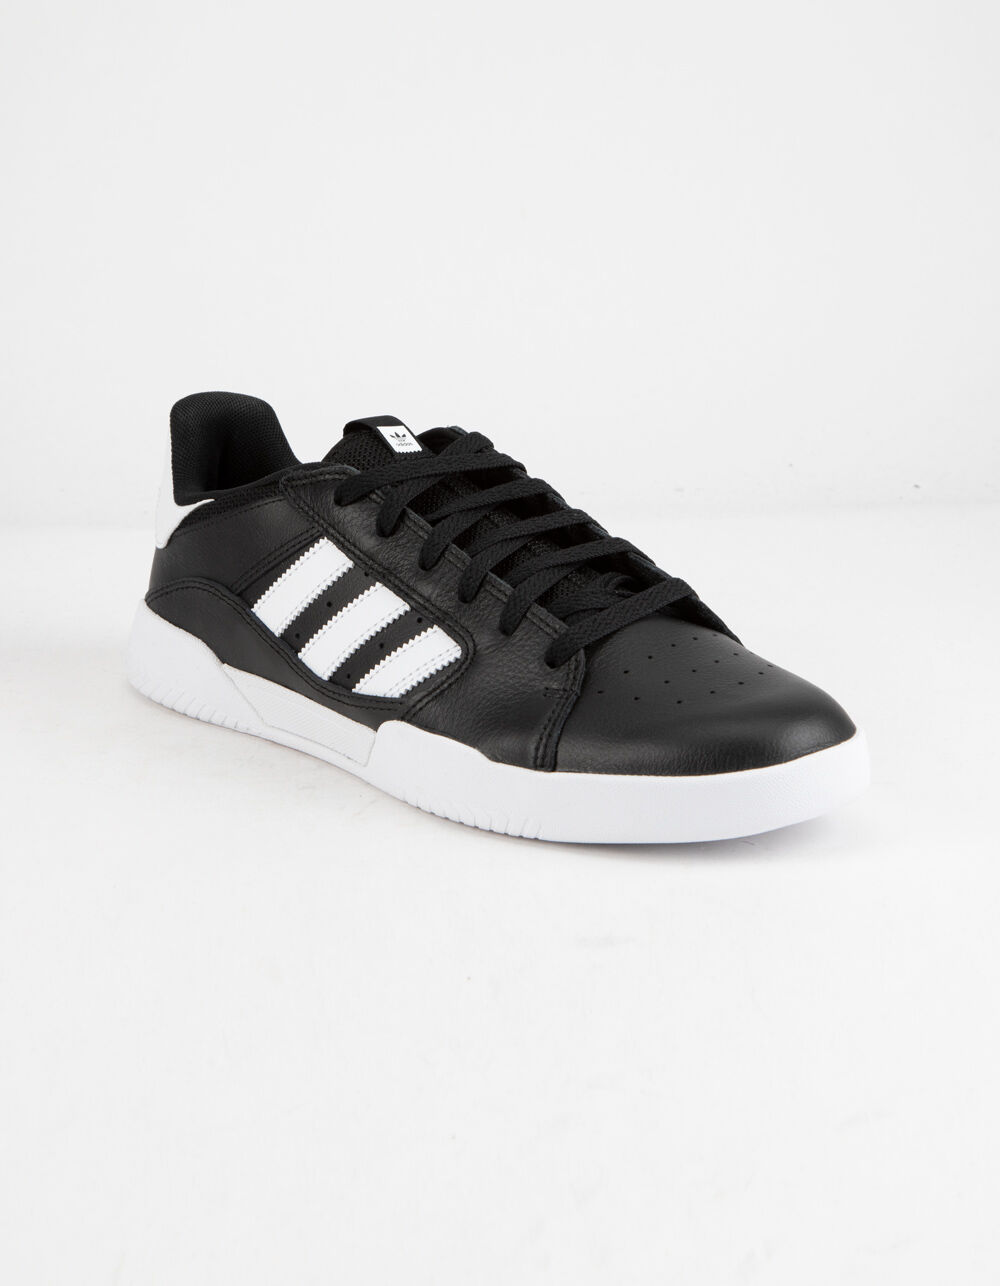 ADIDAS VRX Cup Low Mens Shoes - BLACK/WHITE | Tillys